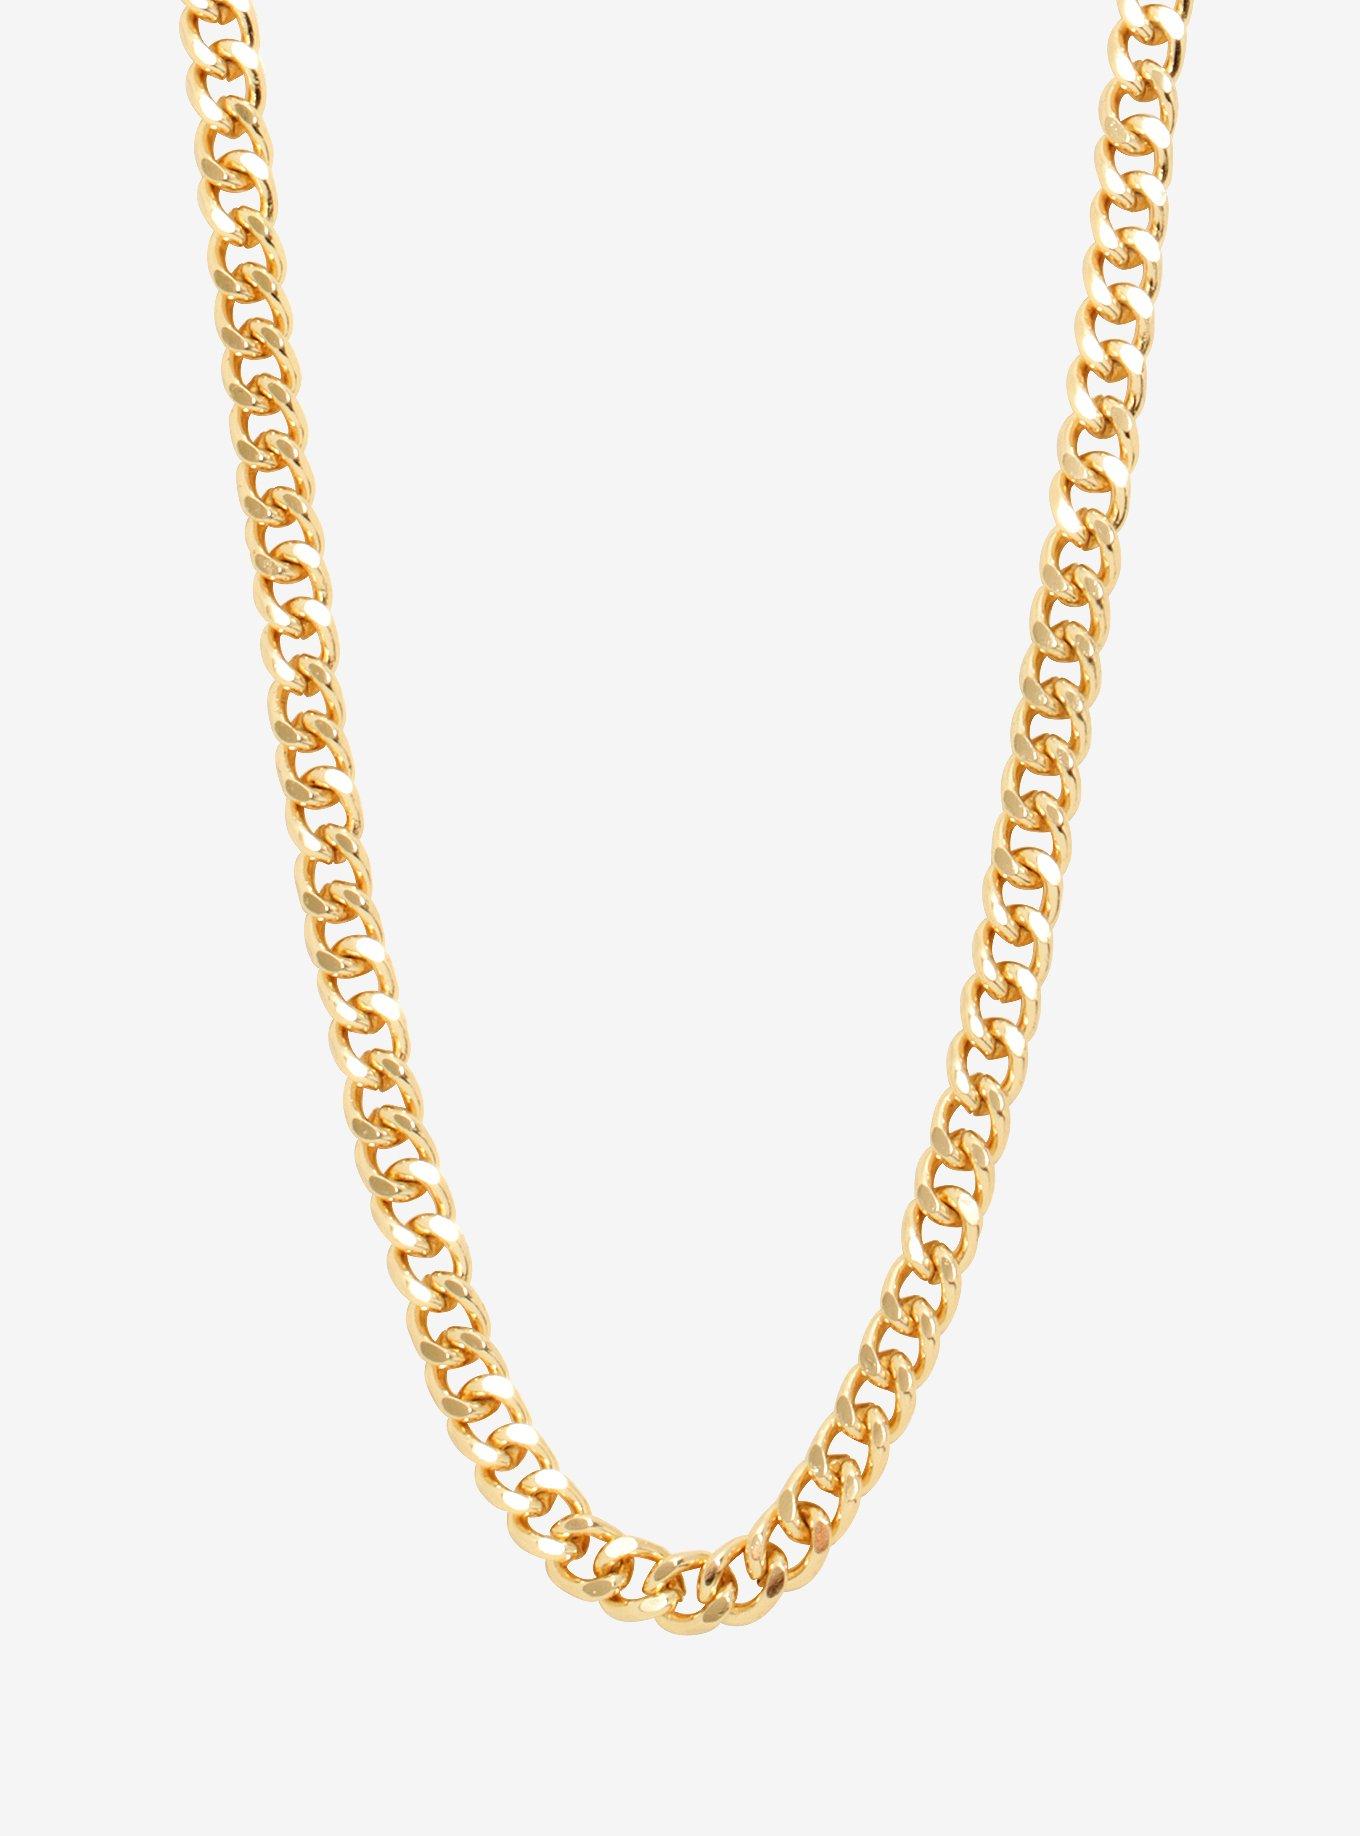 Gold Men's Chain Necklace | Hot Topic